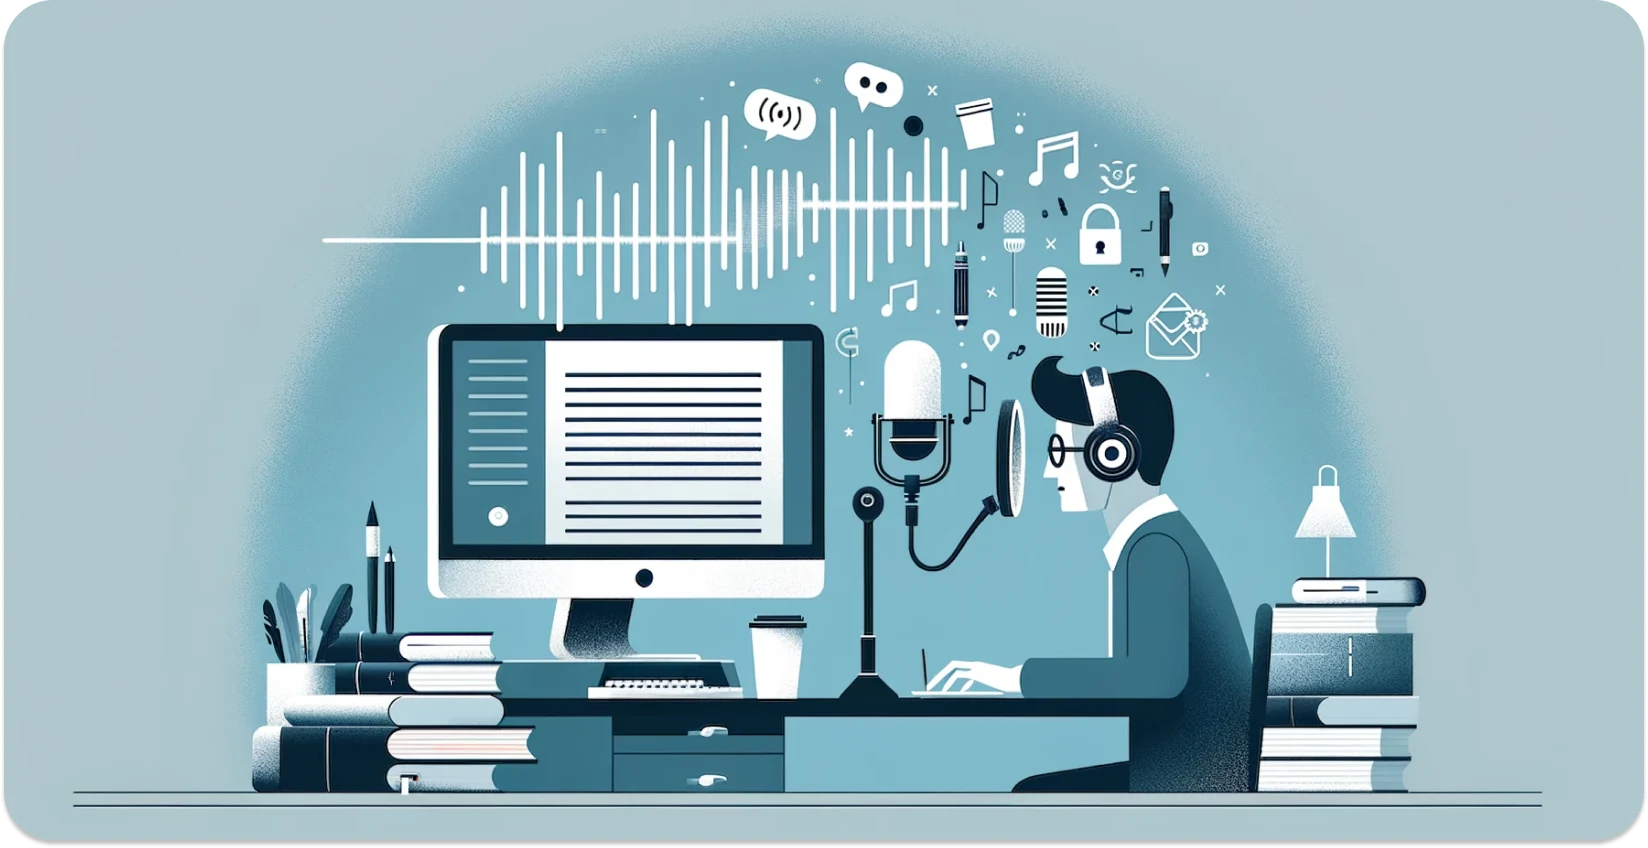 Stylized illustration of a man using dictation software with a waveform and various media icons.